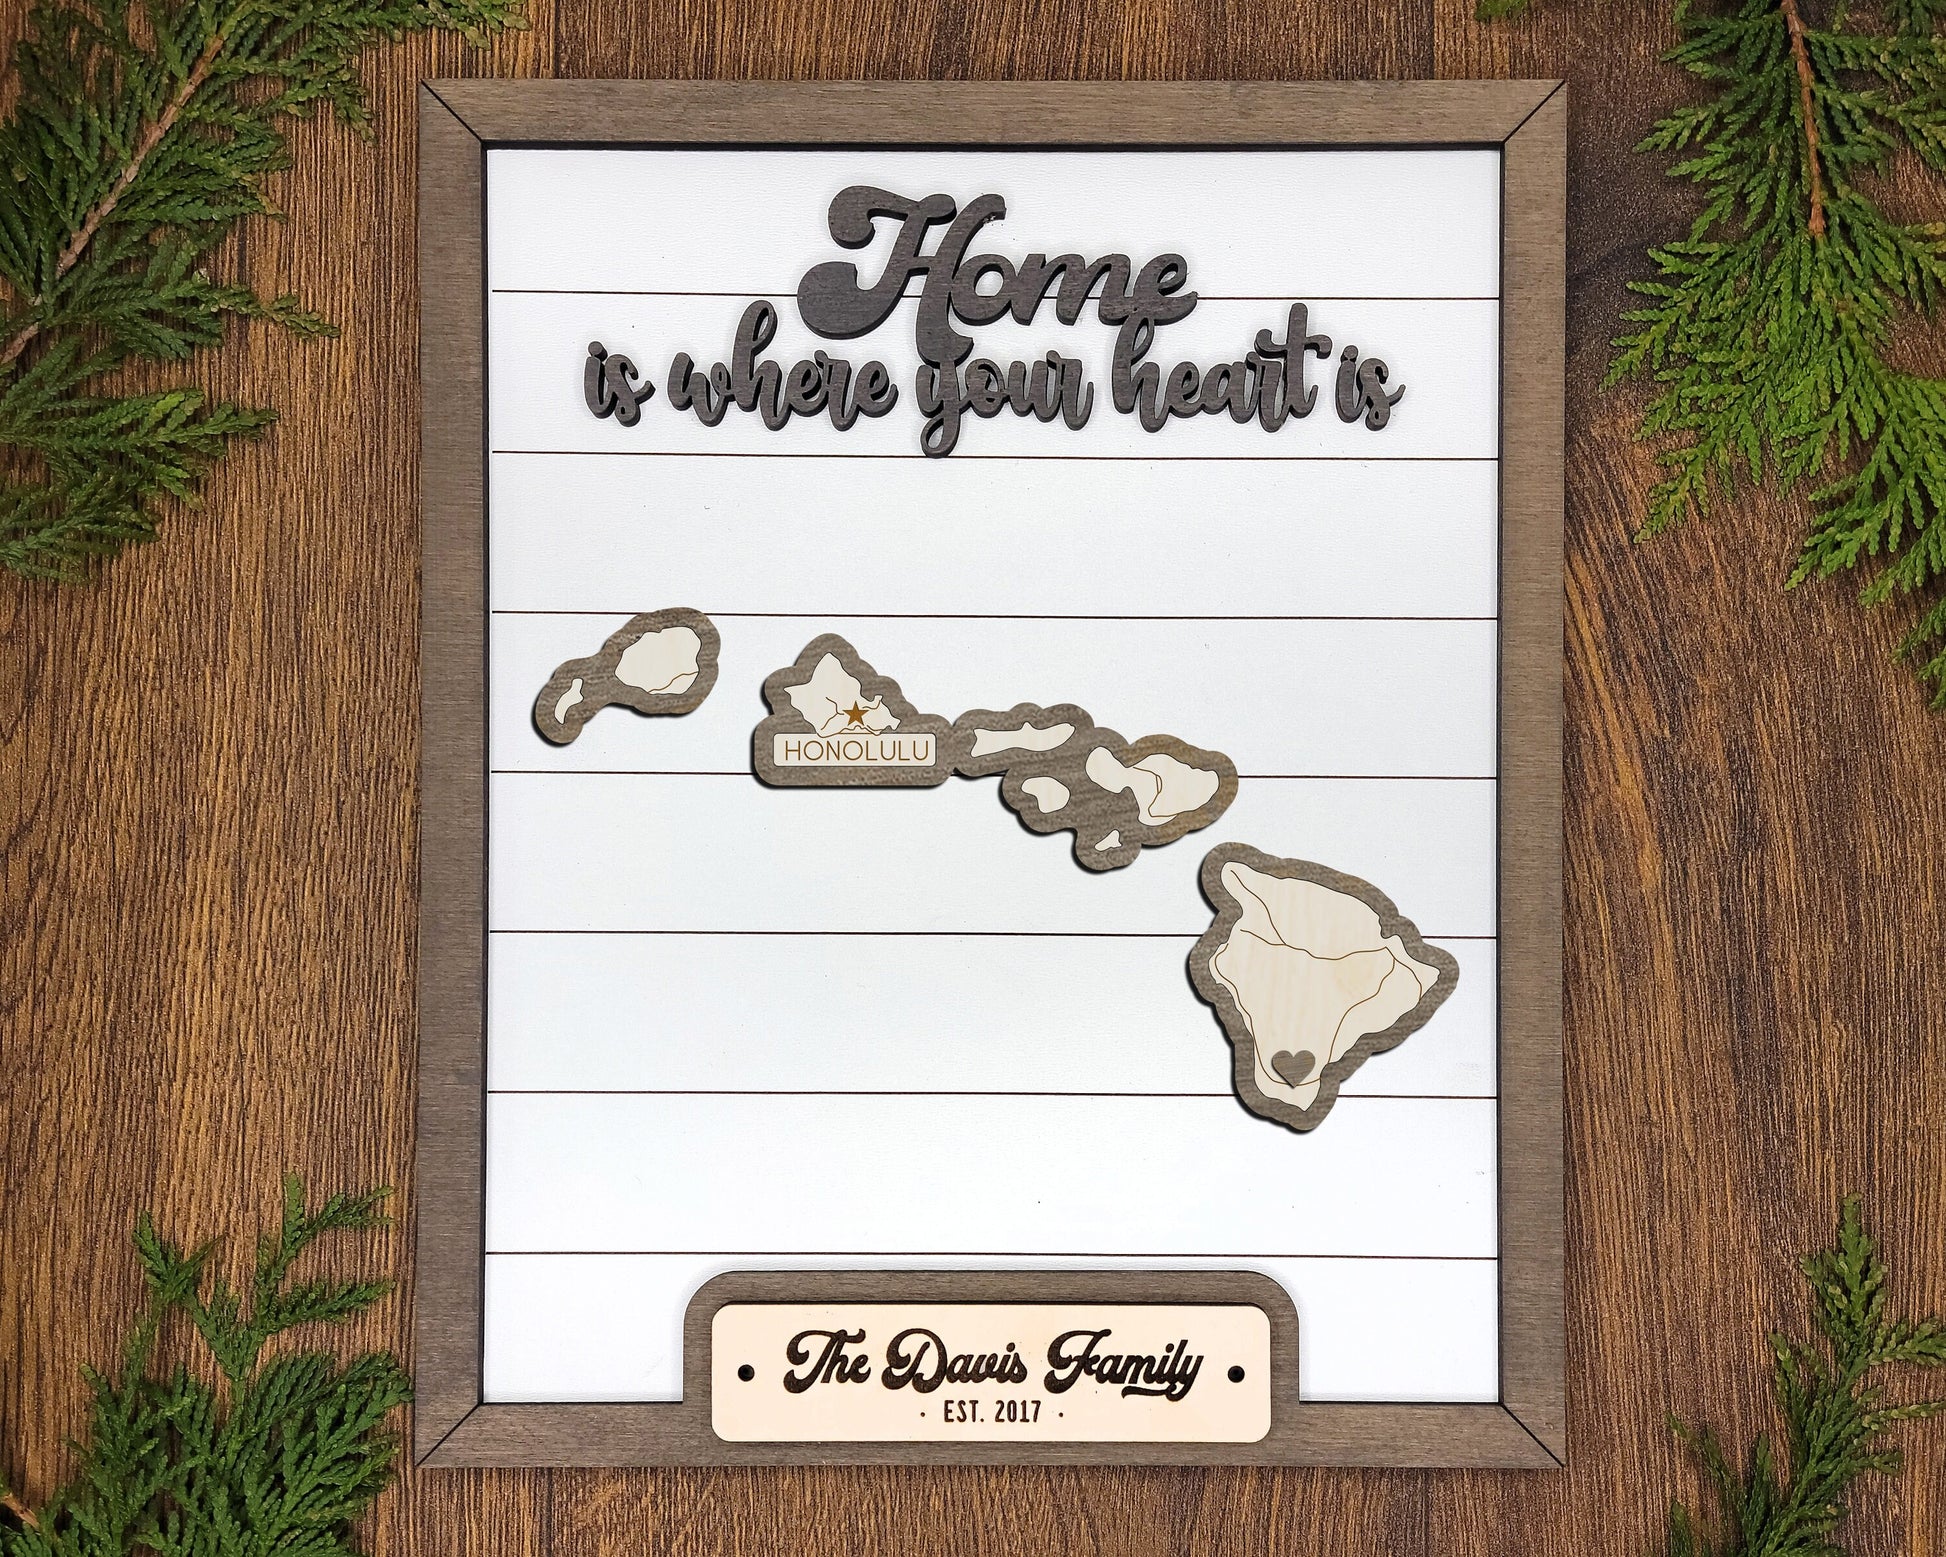 The Hawaii State Frame - 13 text options, 12 backgrounds, 25 icons Included - Make over 7,500 designs - Glowforge & Lightburn Tested